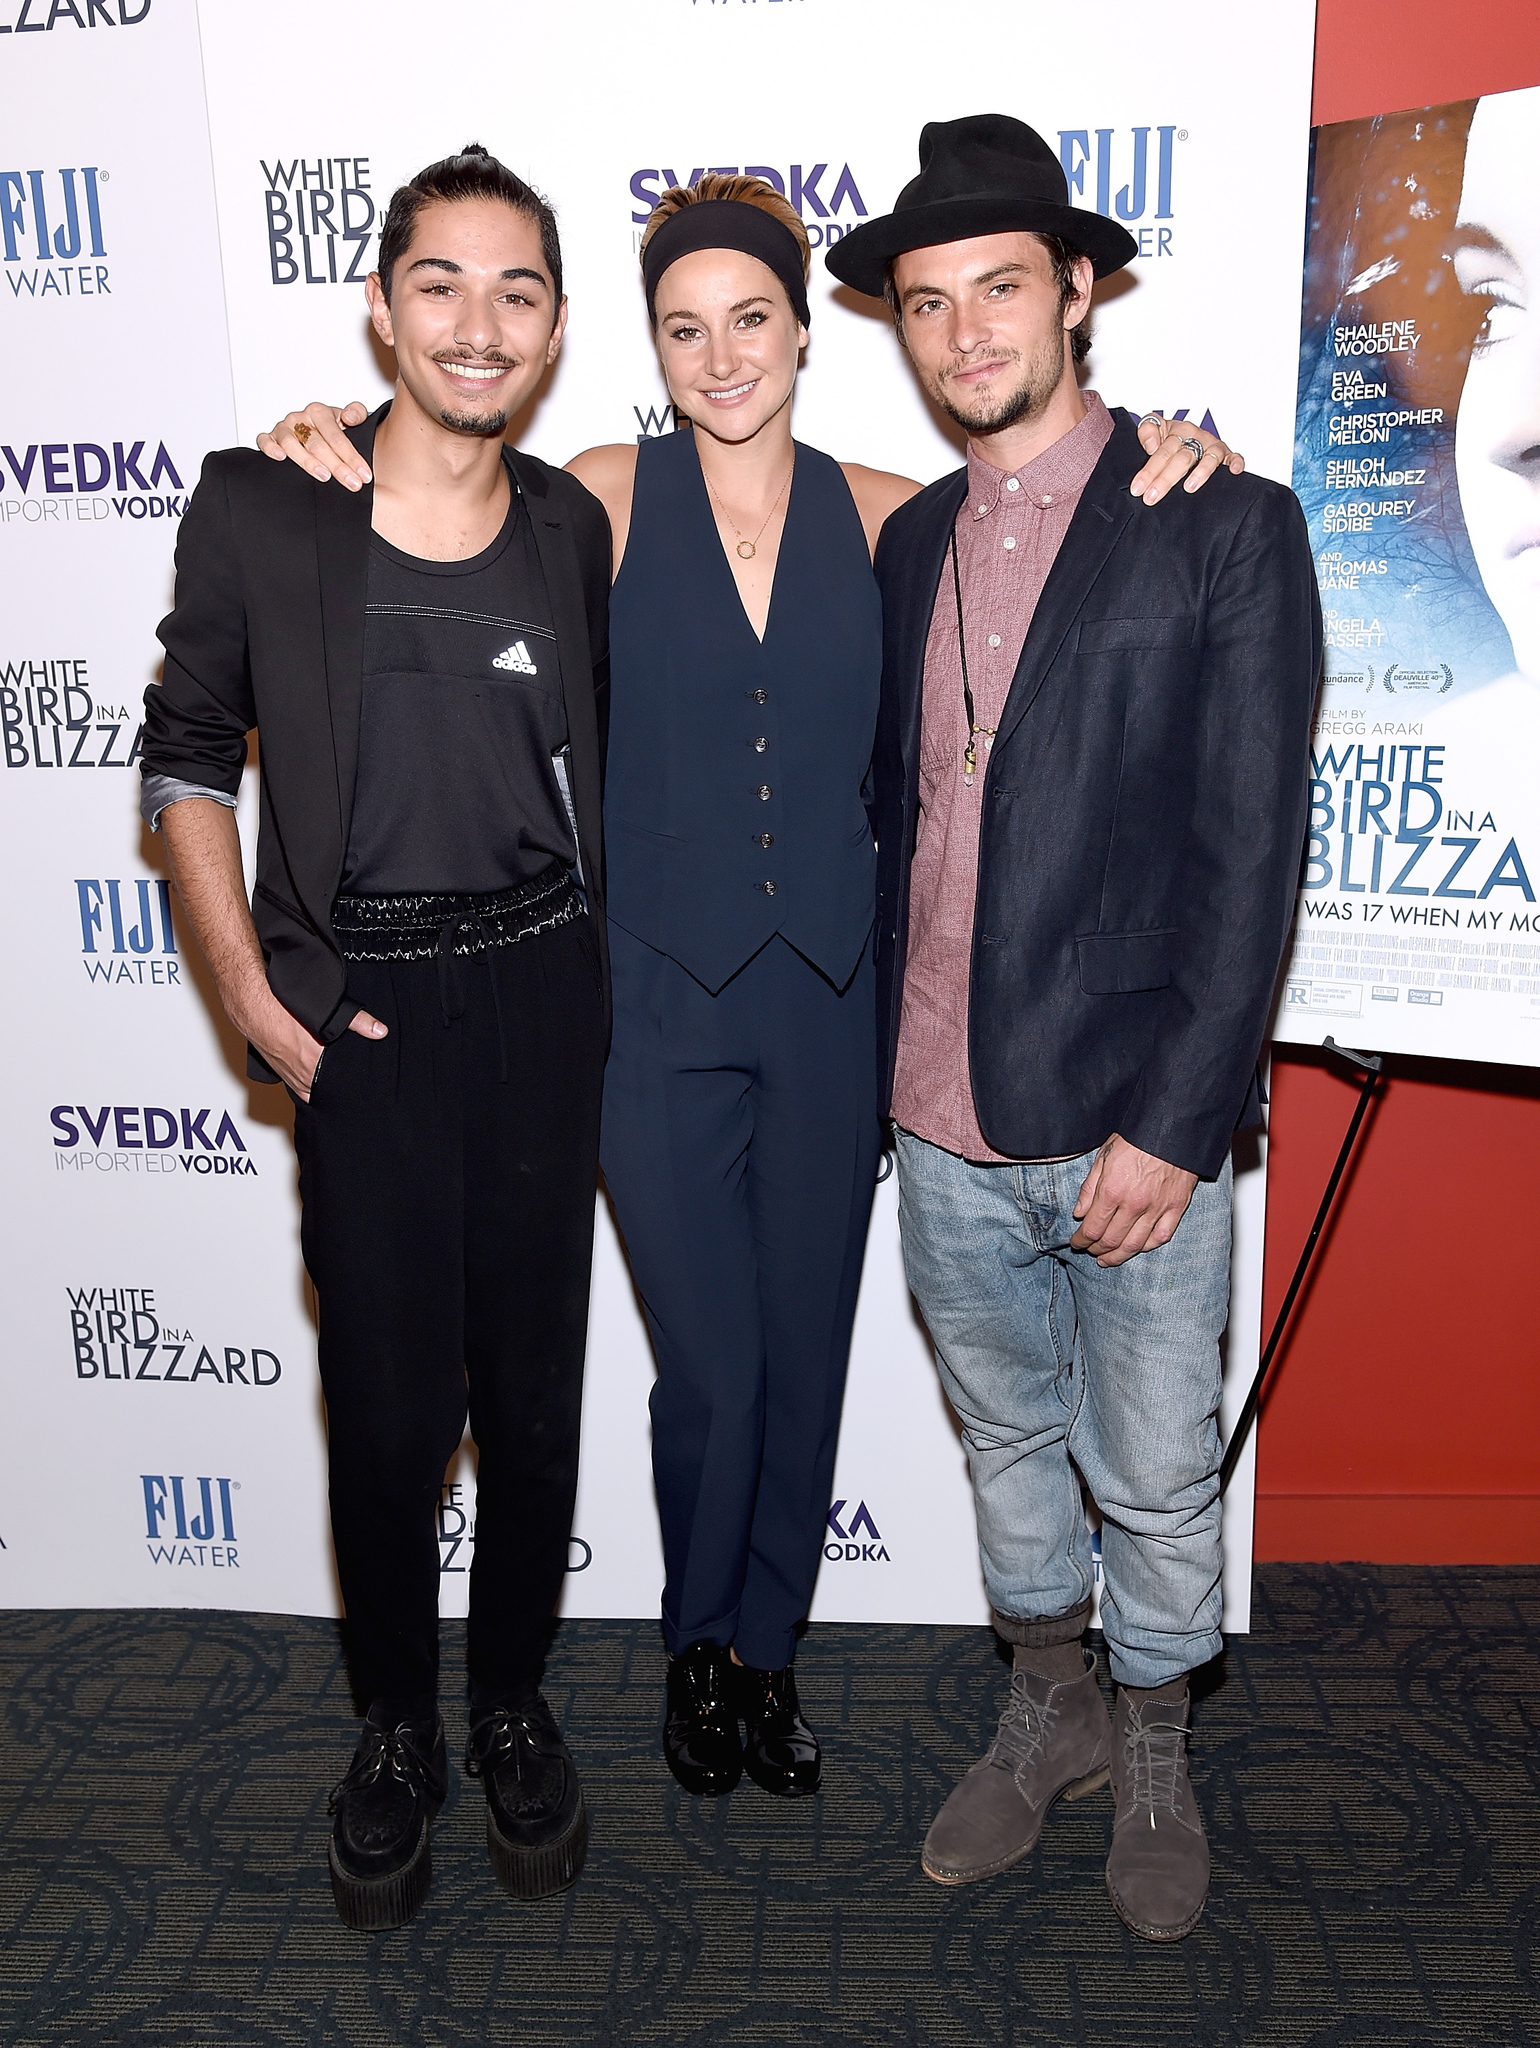 Shailene Woodley, Mark Indelicato and Shiloh Fernandez at event of White Bird in a Blizzard (2014)